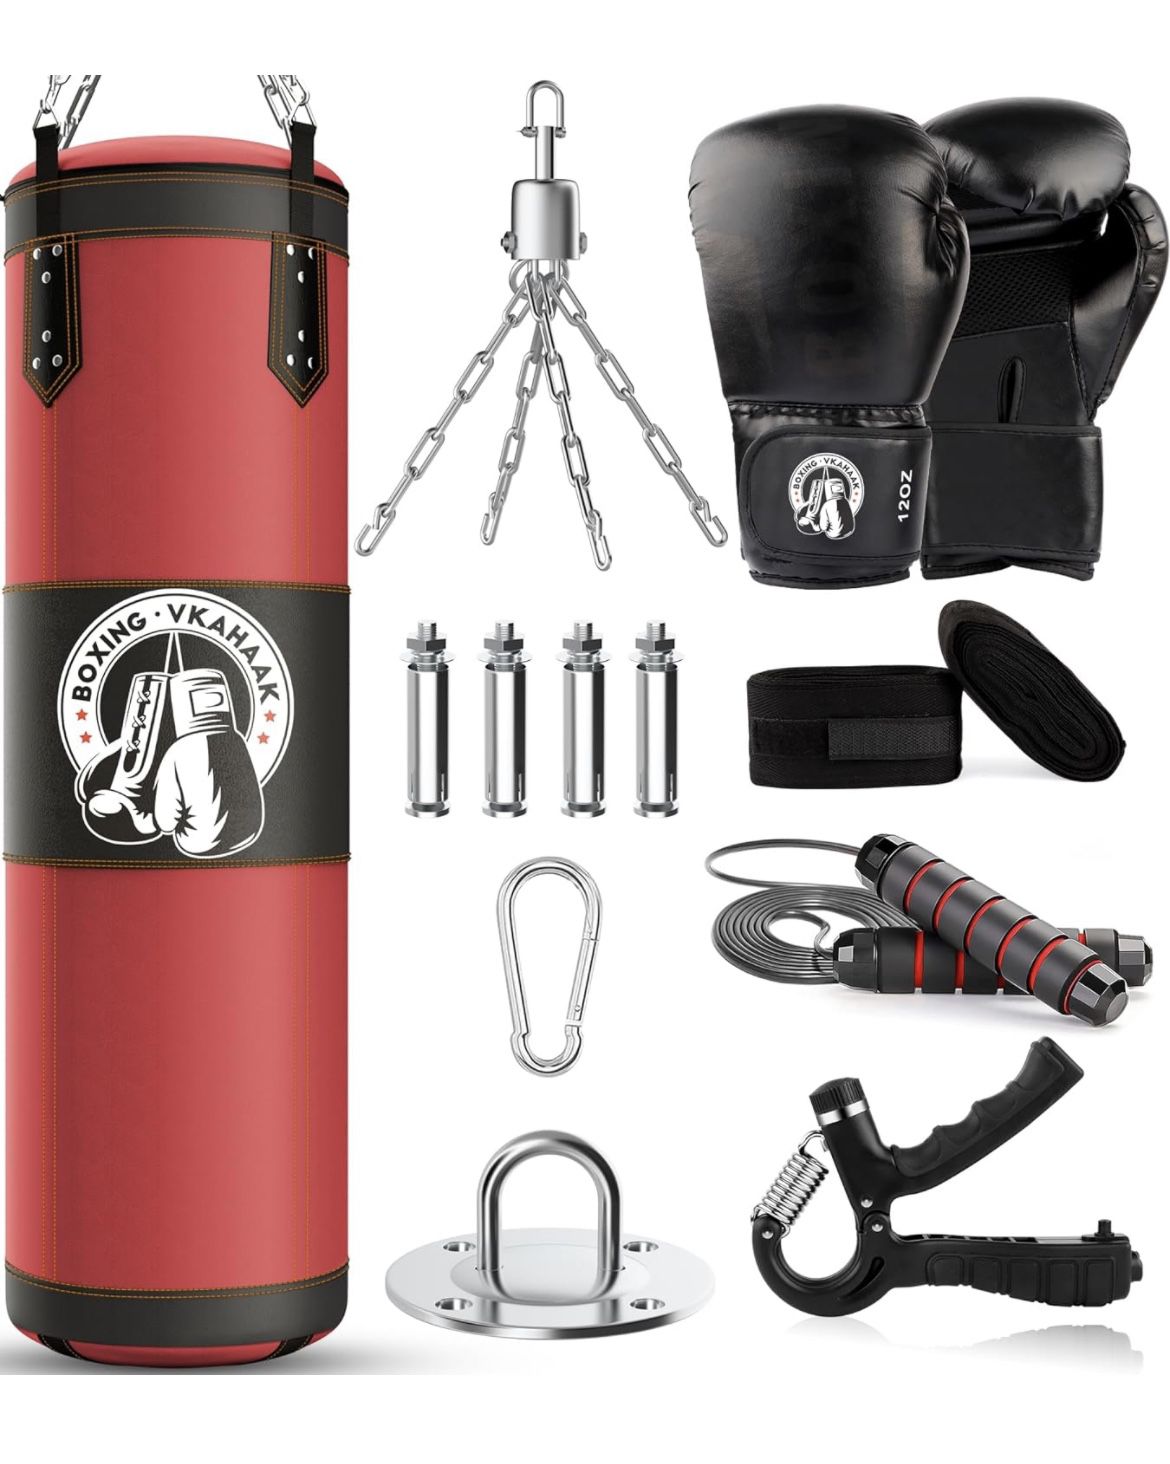 Vkahaak 4FT Punching Bag for Adults/Kids, Unfilled Heavy Punching Bag, Boxing Bag Set with Punching Gloves, Wraps, Chain, Ceiling Hook for MMA Kickbox